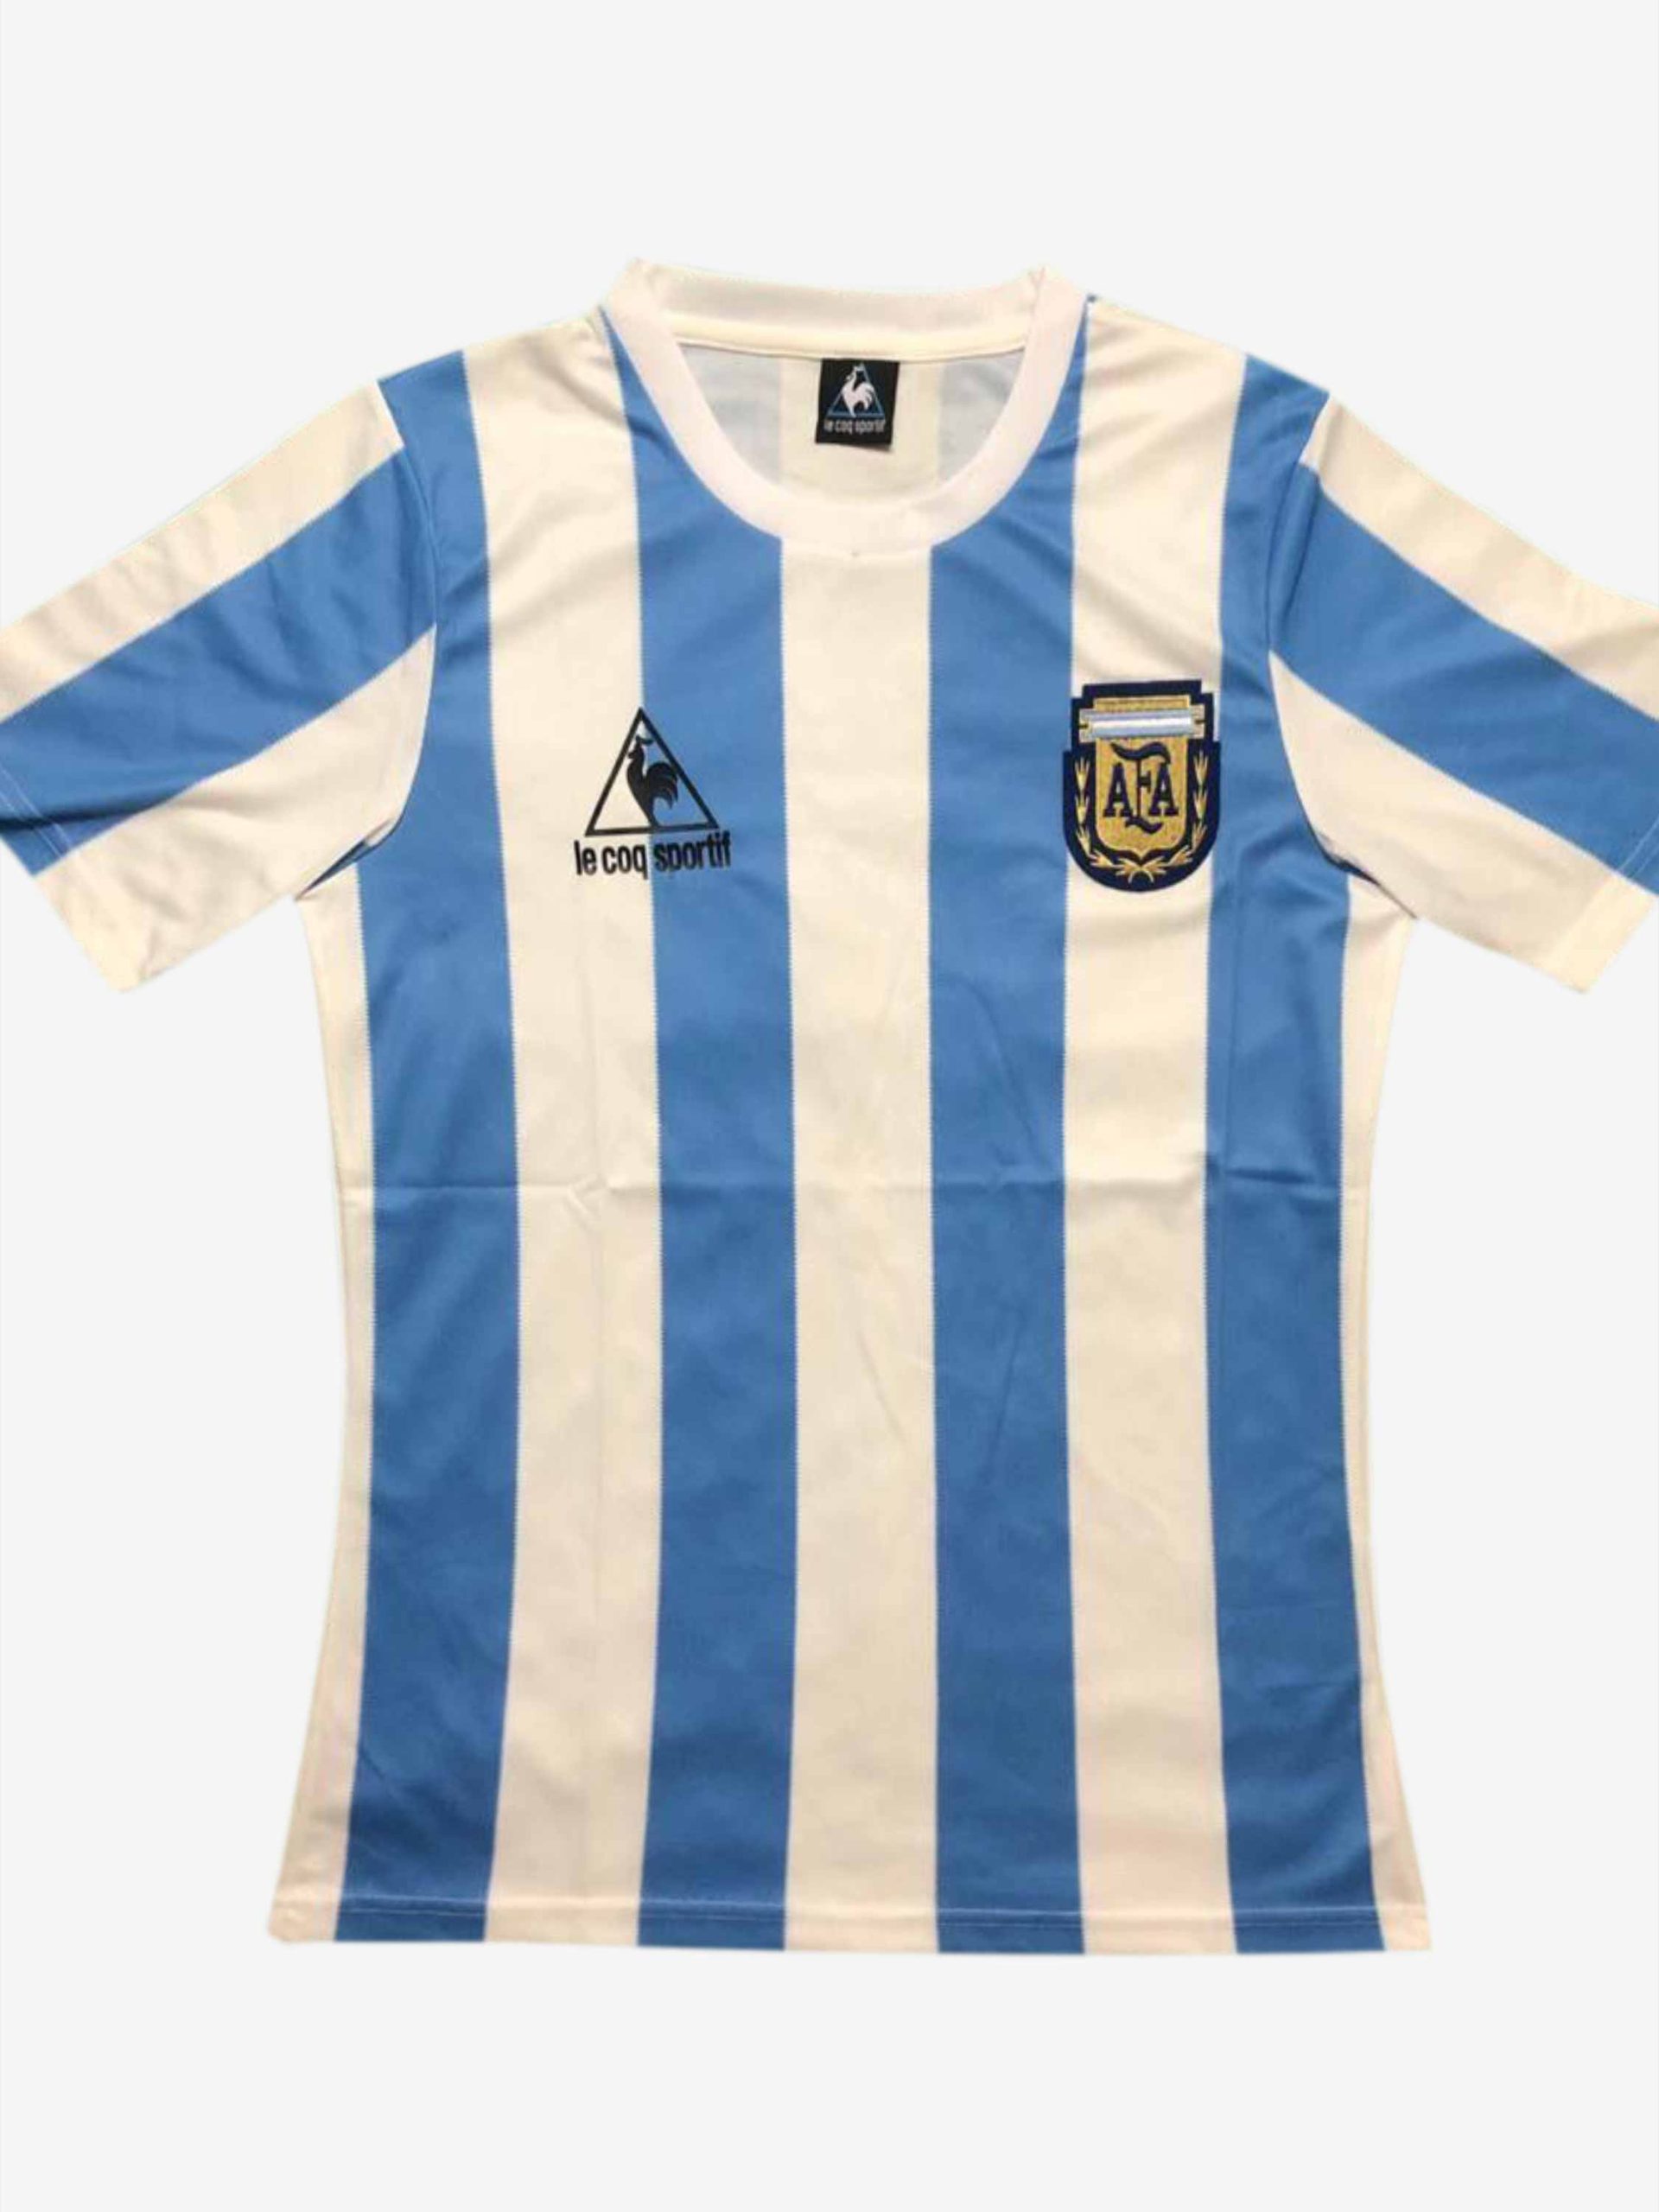 Argentina Home 1986 World Cup Retro Jersey.